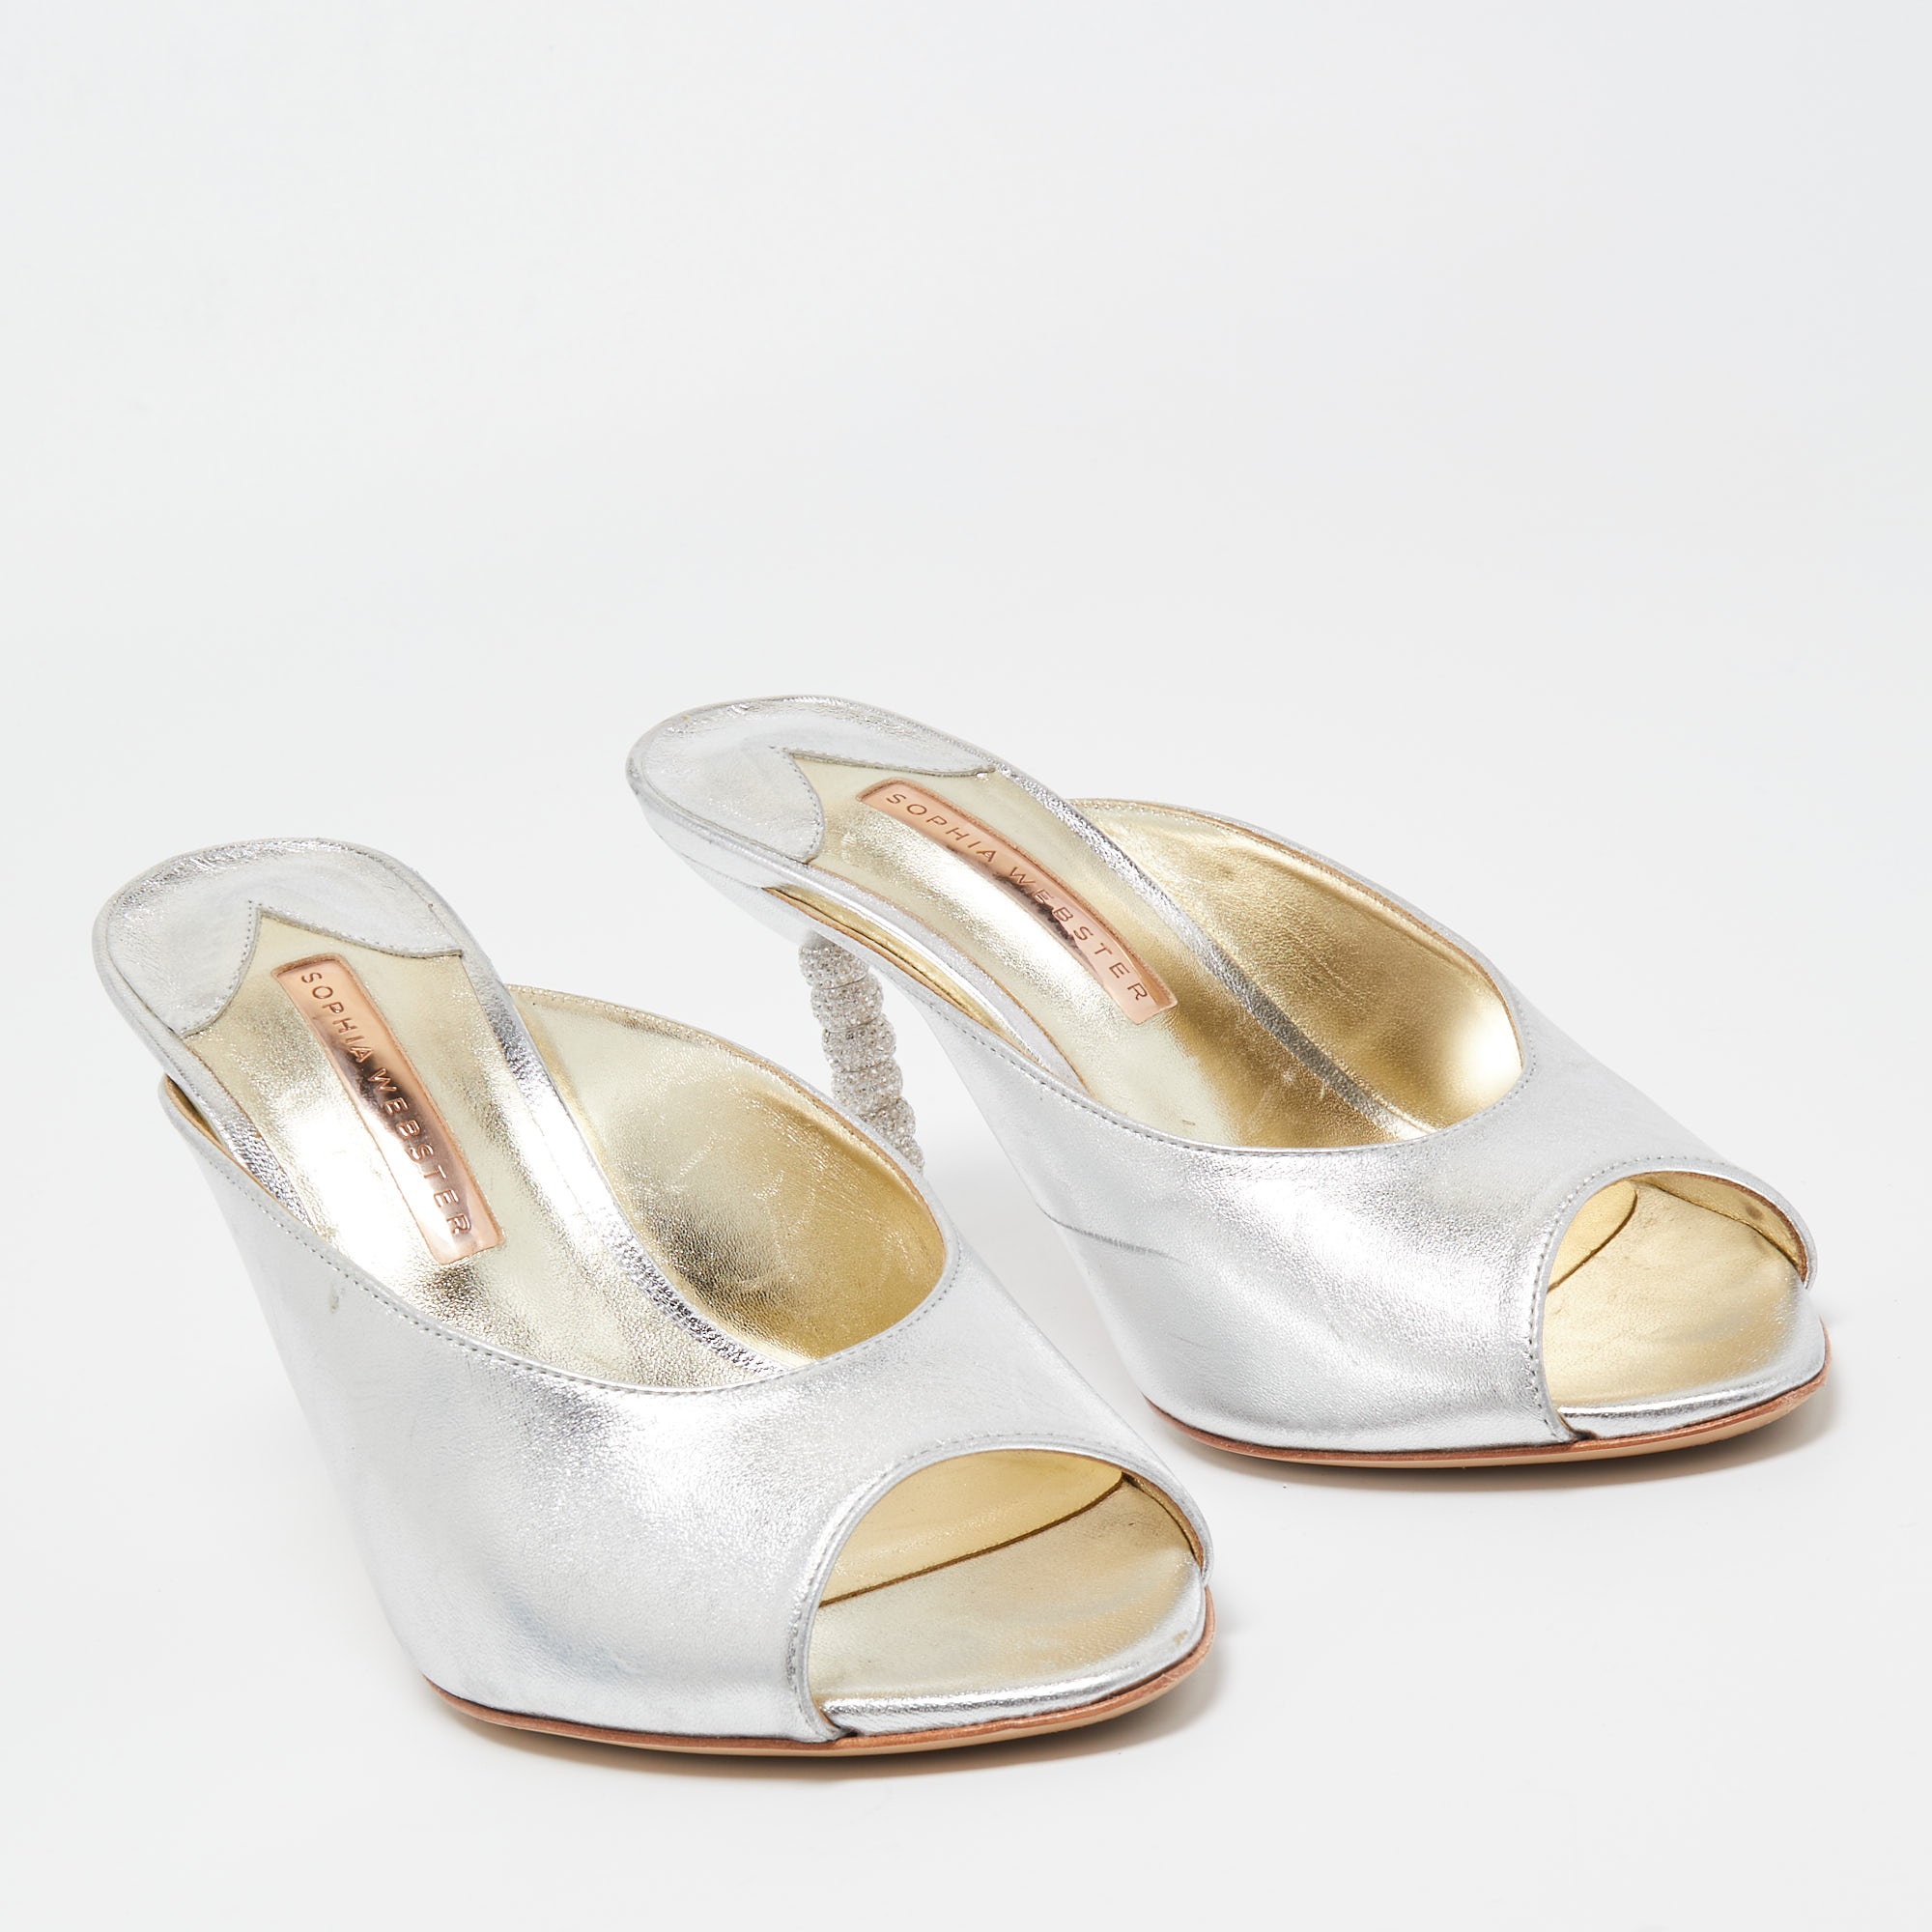 Sophia Webster Silver Leather Mules Size 39